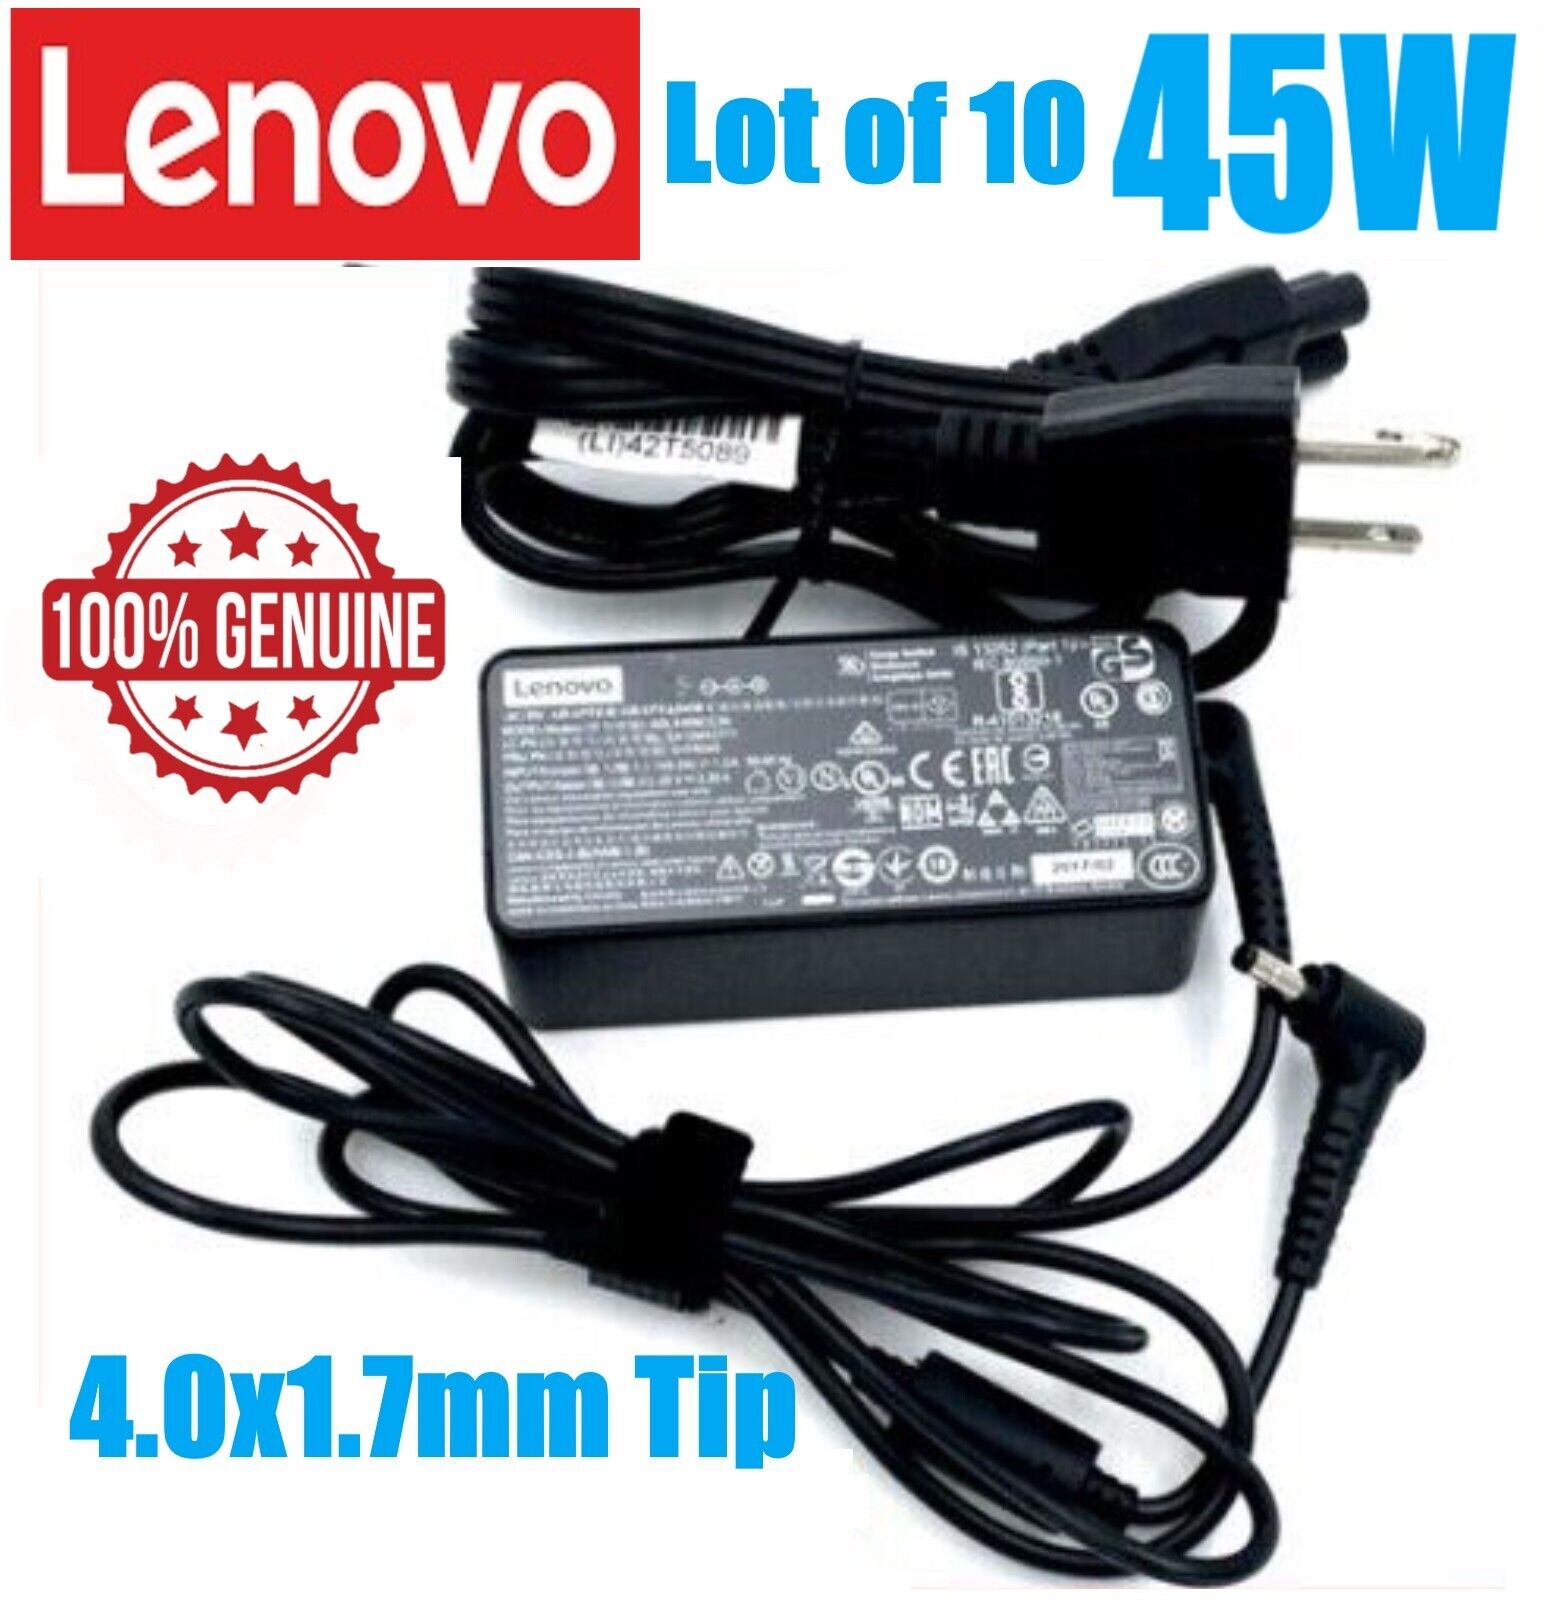 LOT OF 10 Genuine Lenovo 45W 4.0x1.7mm Small Black Tip AC Adapter Power Charger